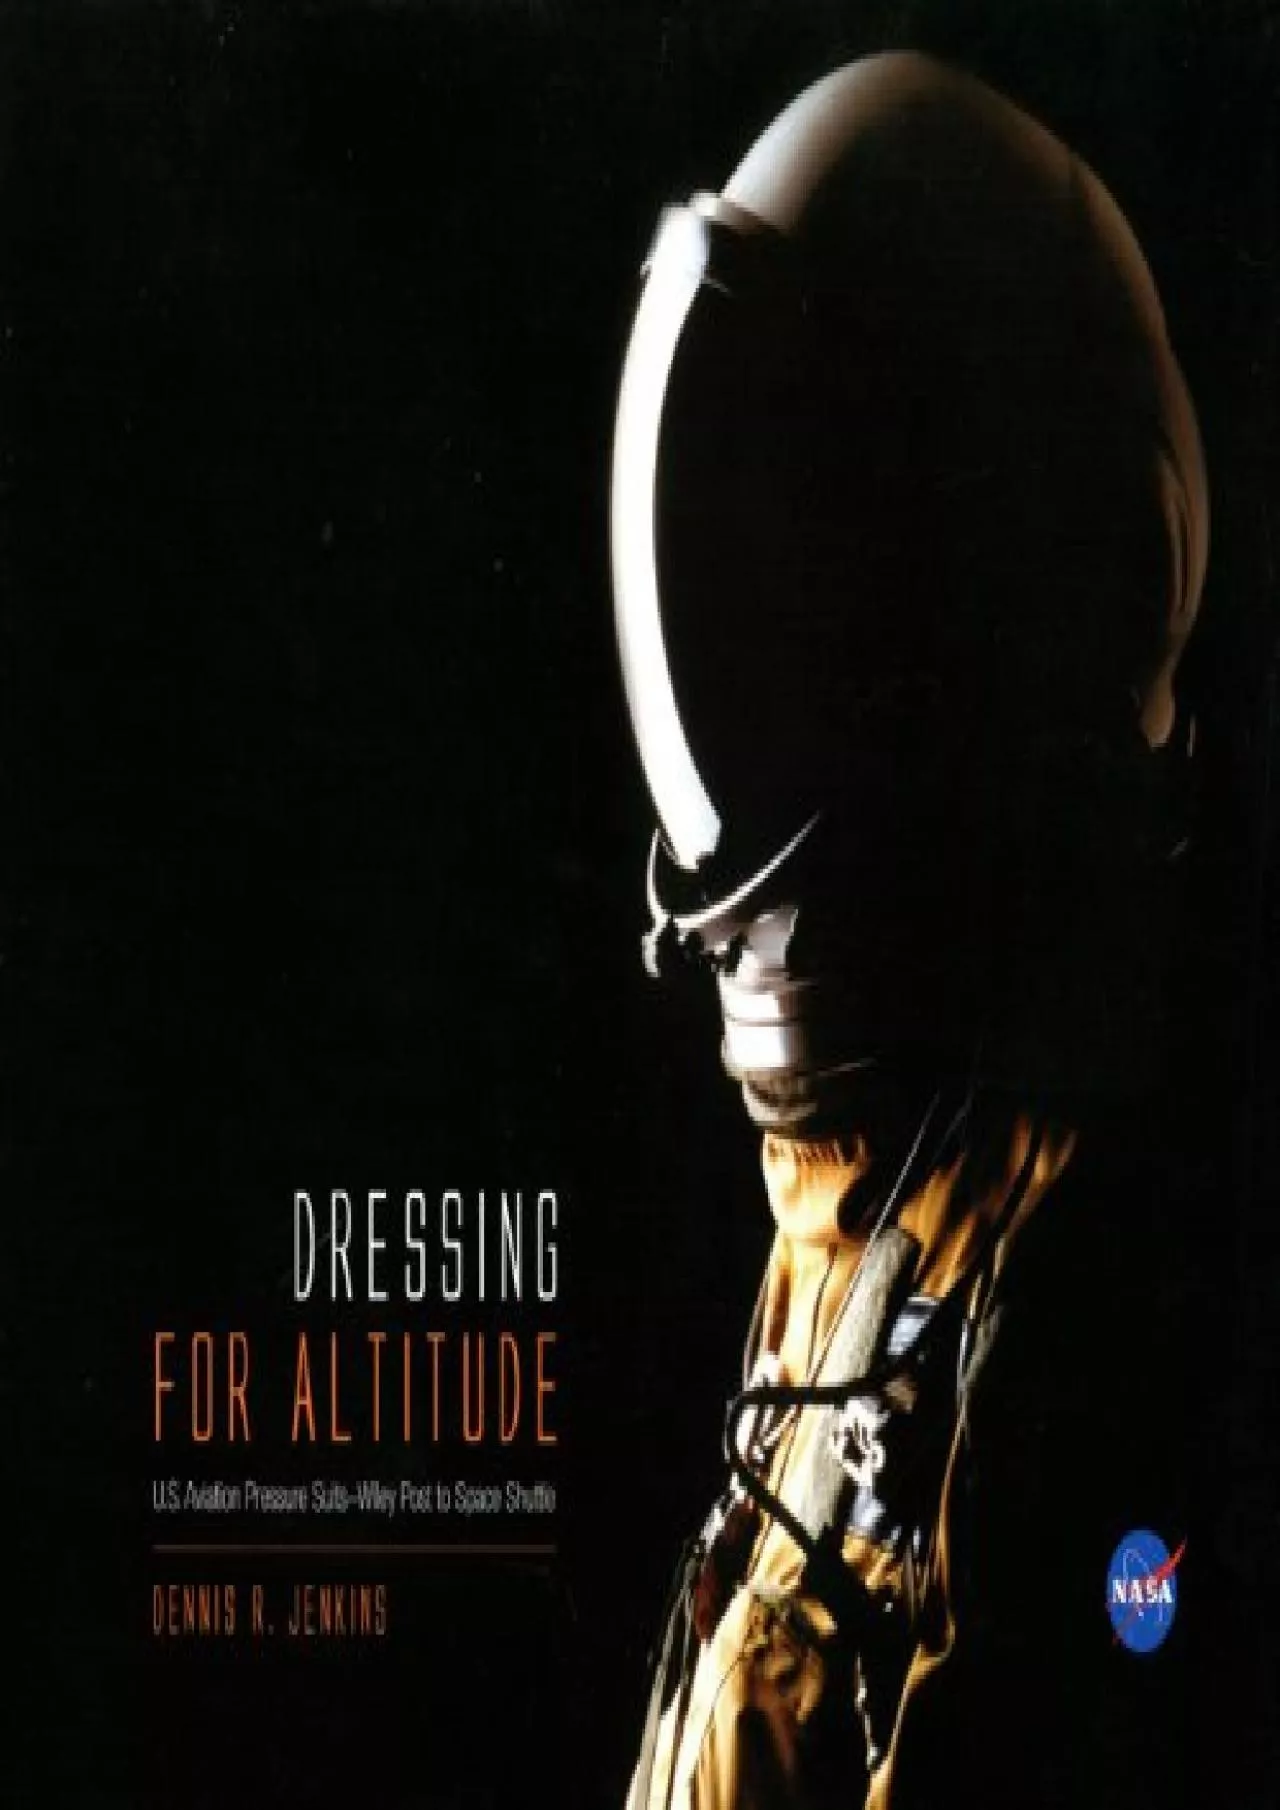 (BOOK)-Dressing for Altitude: U.S. Aviation Pressure Suits, Wiley Post to Space Shuttle: